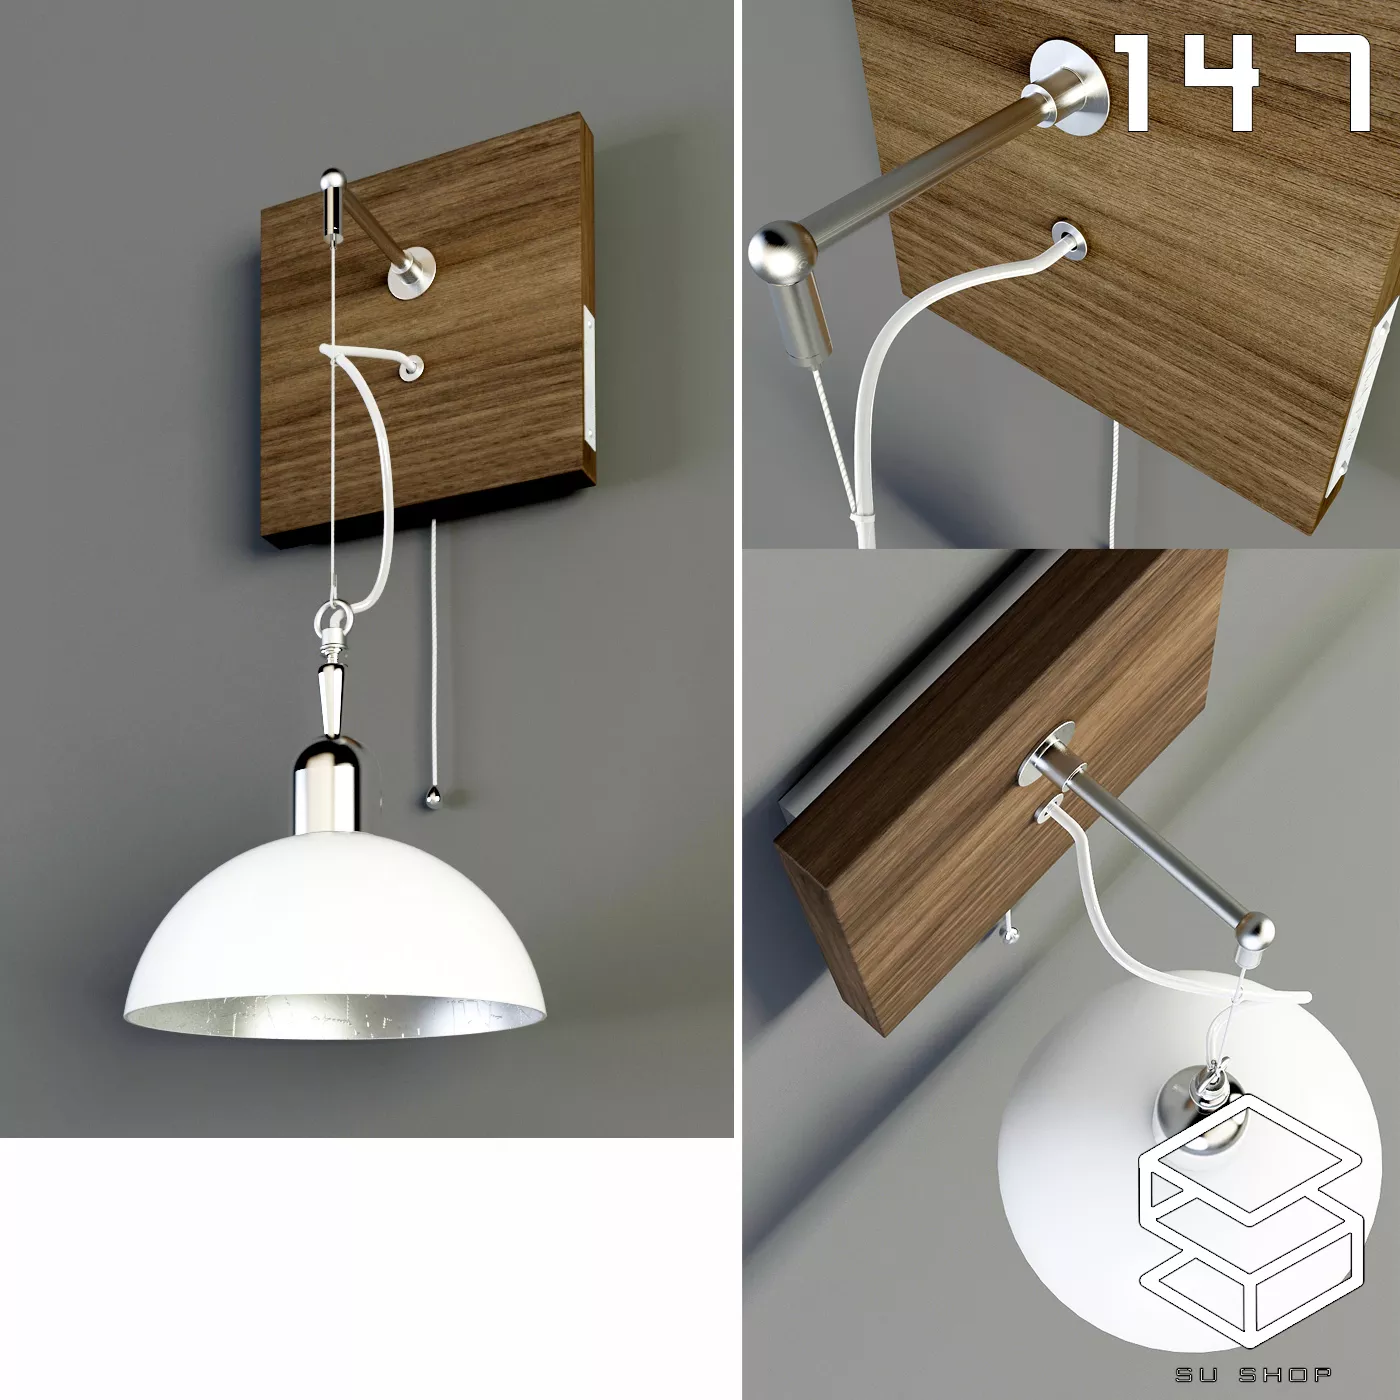 MODERN WALL LAMP - SKETCHUP 3D MODEL - VRAY OR ENSCAPE - ID16161